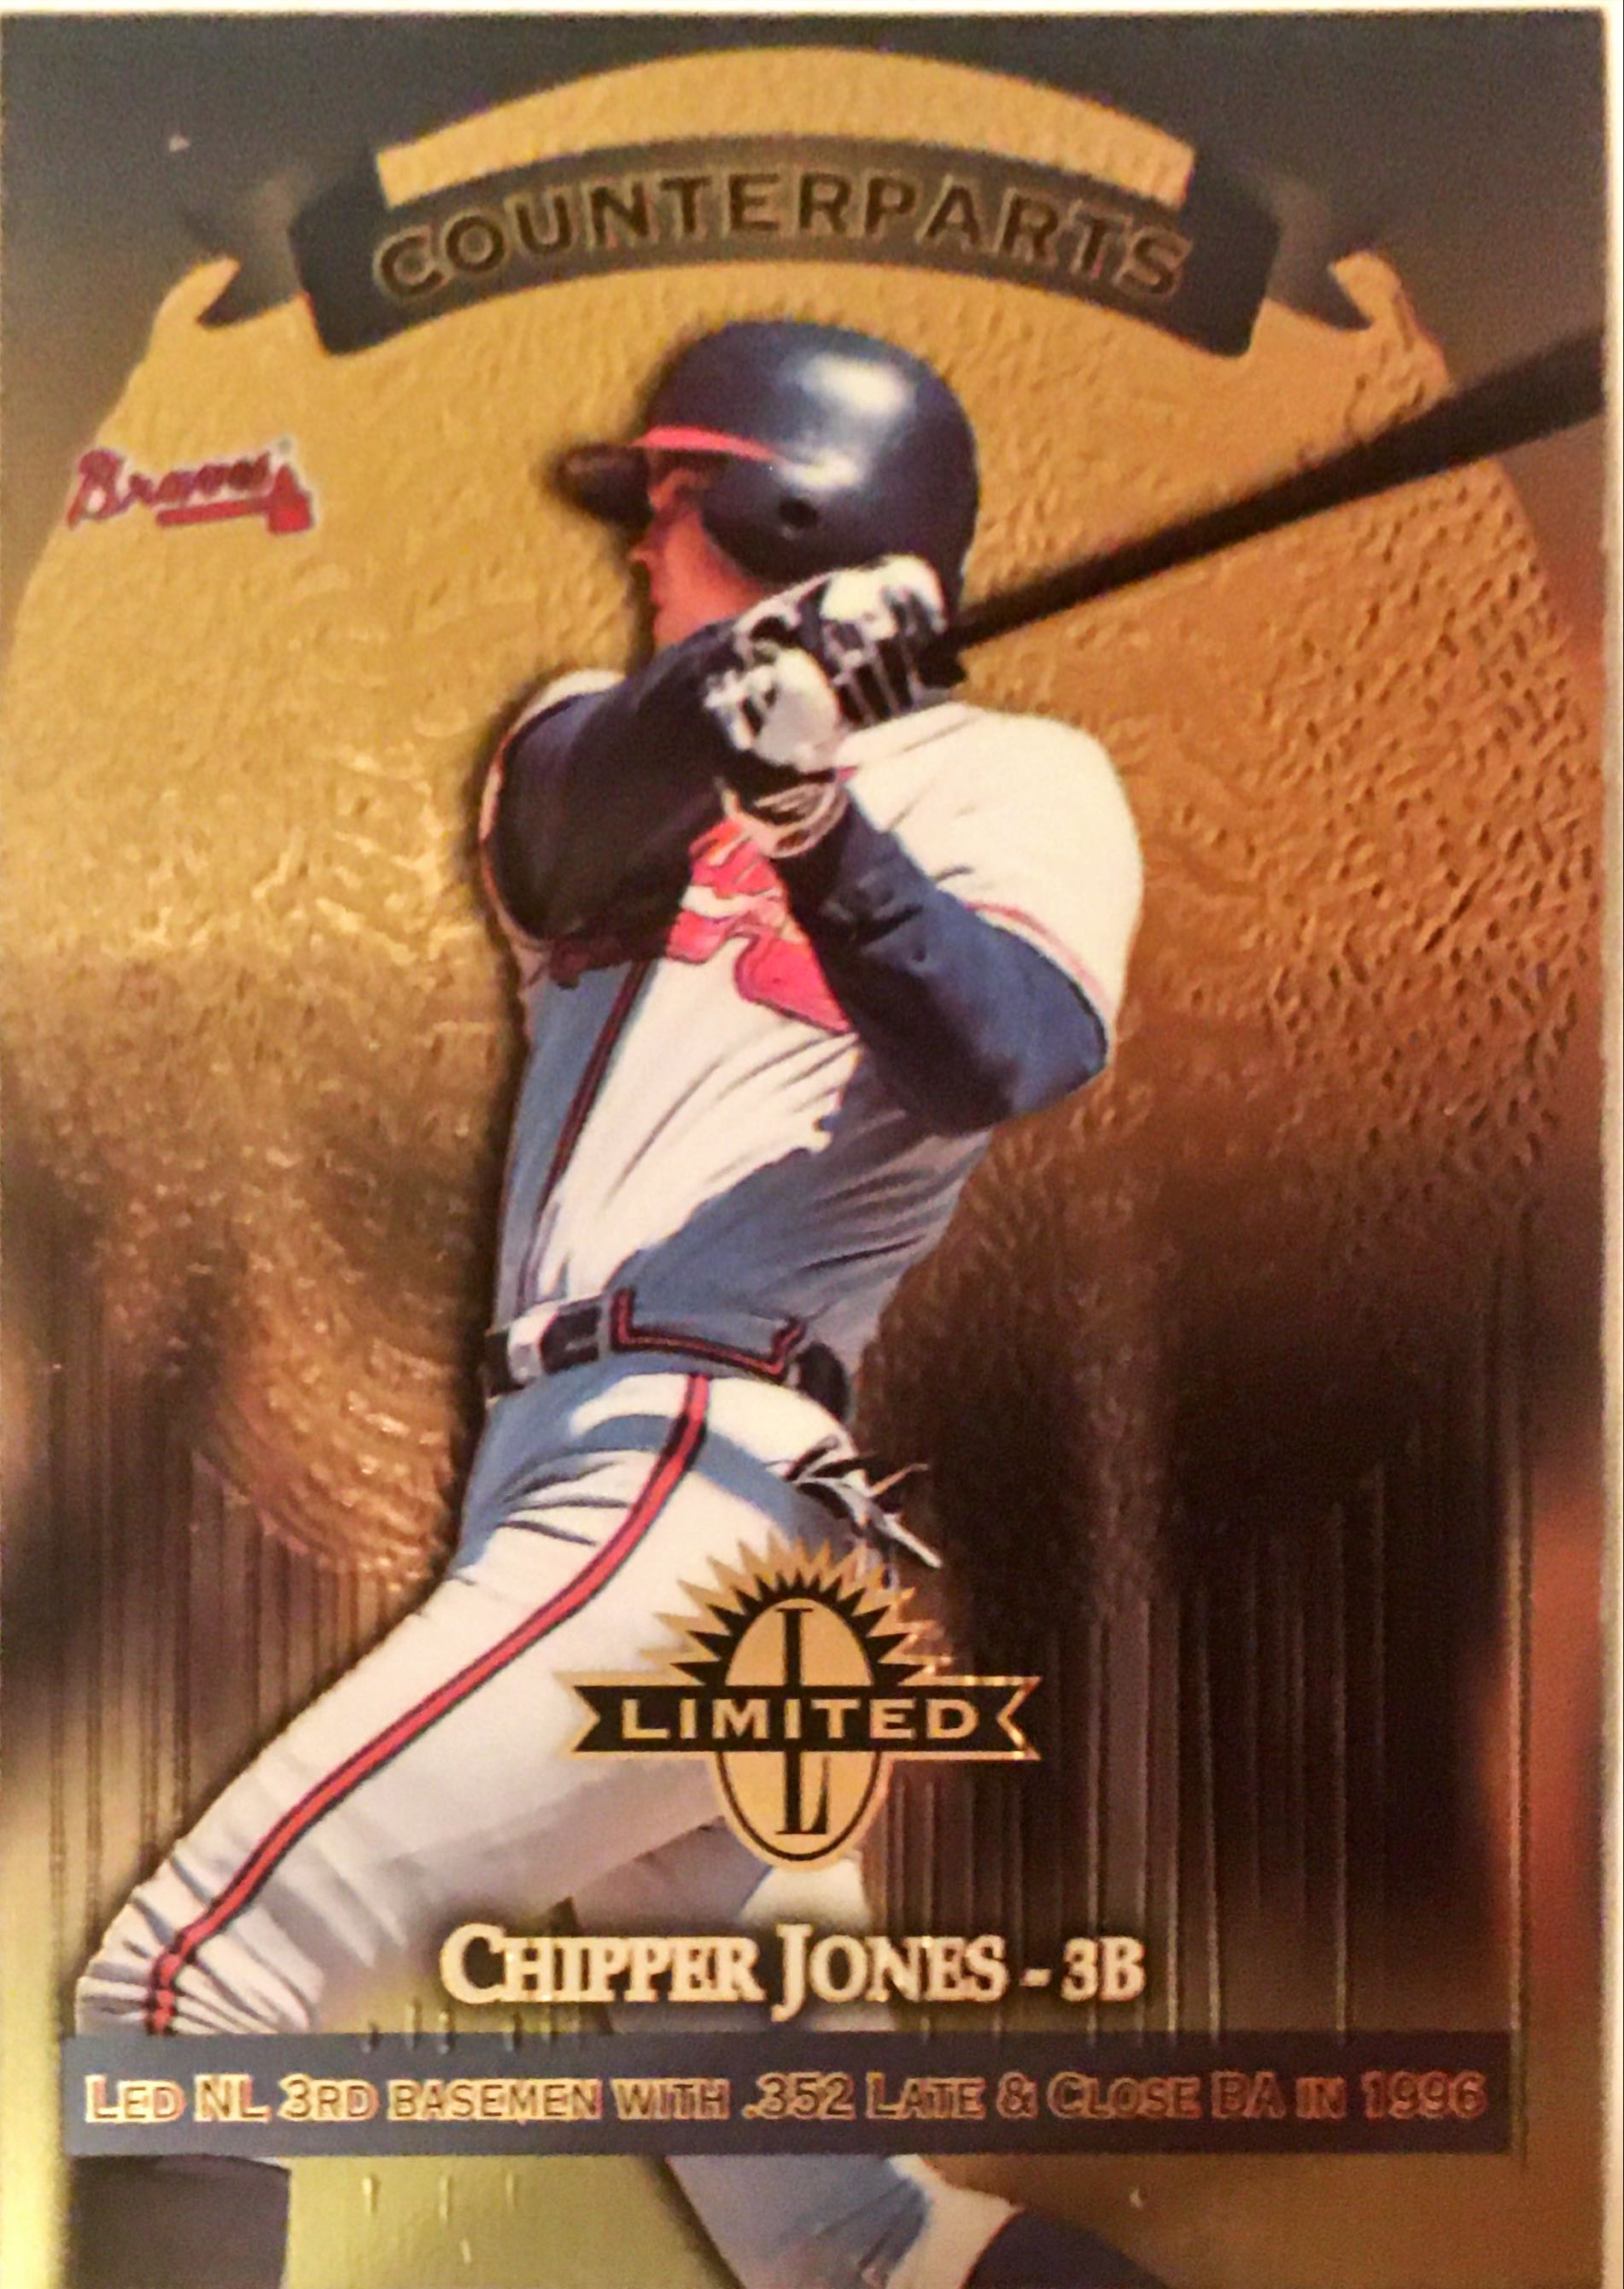 1997 Donruss Limited 23 front image